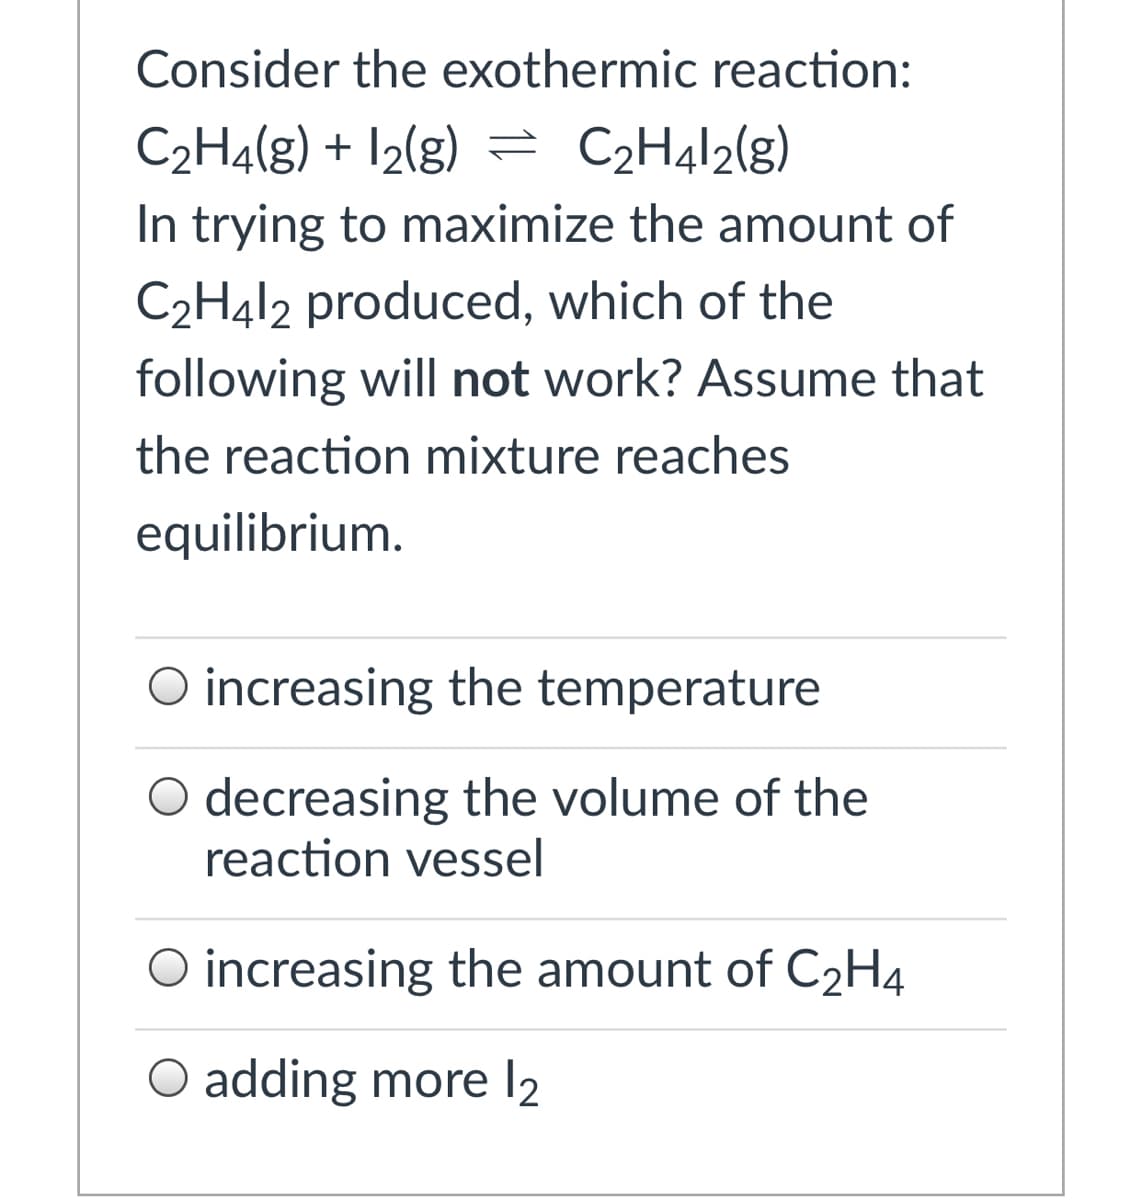 Consider the exothermic reaction:
C2H4(g) + I2(g) = C2H412(g)
In trying to maximize the amount of
C2H412 produced, which of the
following will not work? Assume that
the reaction mixture reaches
equilibrium.
O increasing the temperature
O decreasing the volume of the
reaction vessel
O increasing the amount of C2H4
O adding more l2
